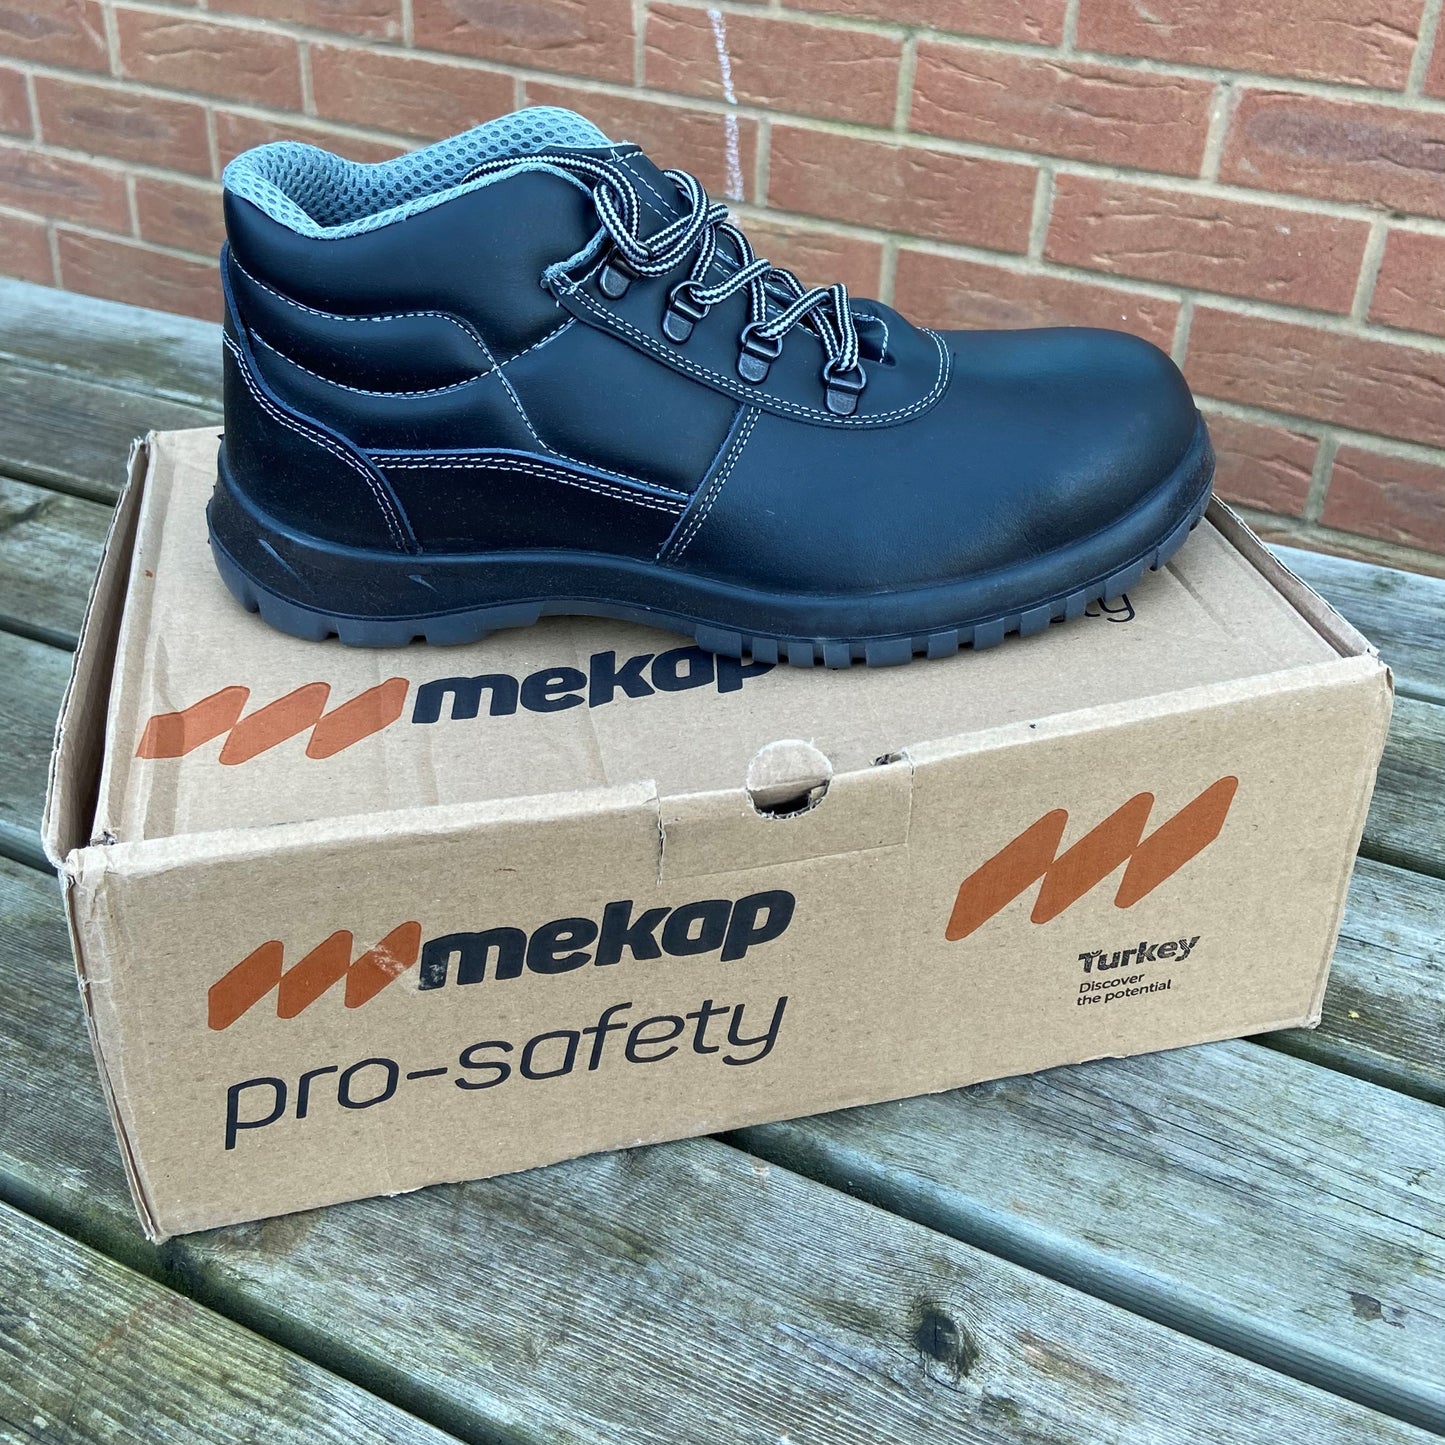 Size 8 Mekop Pro Safety Boots